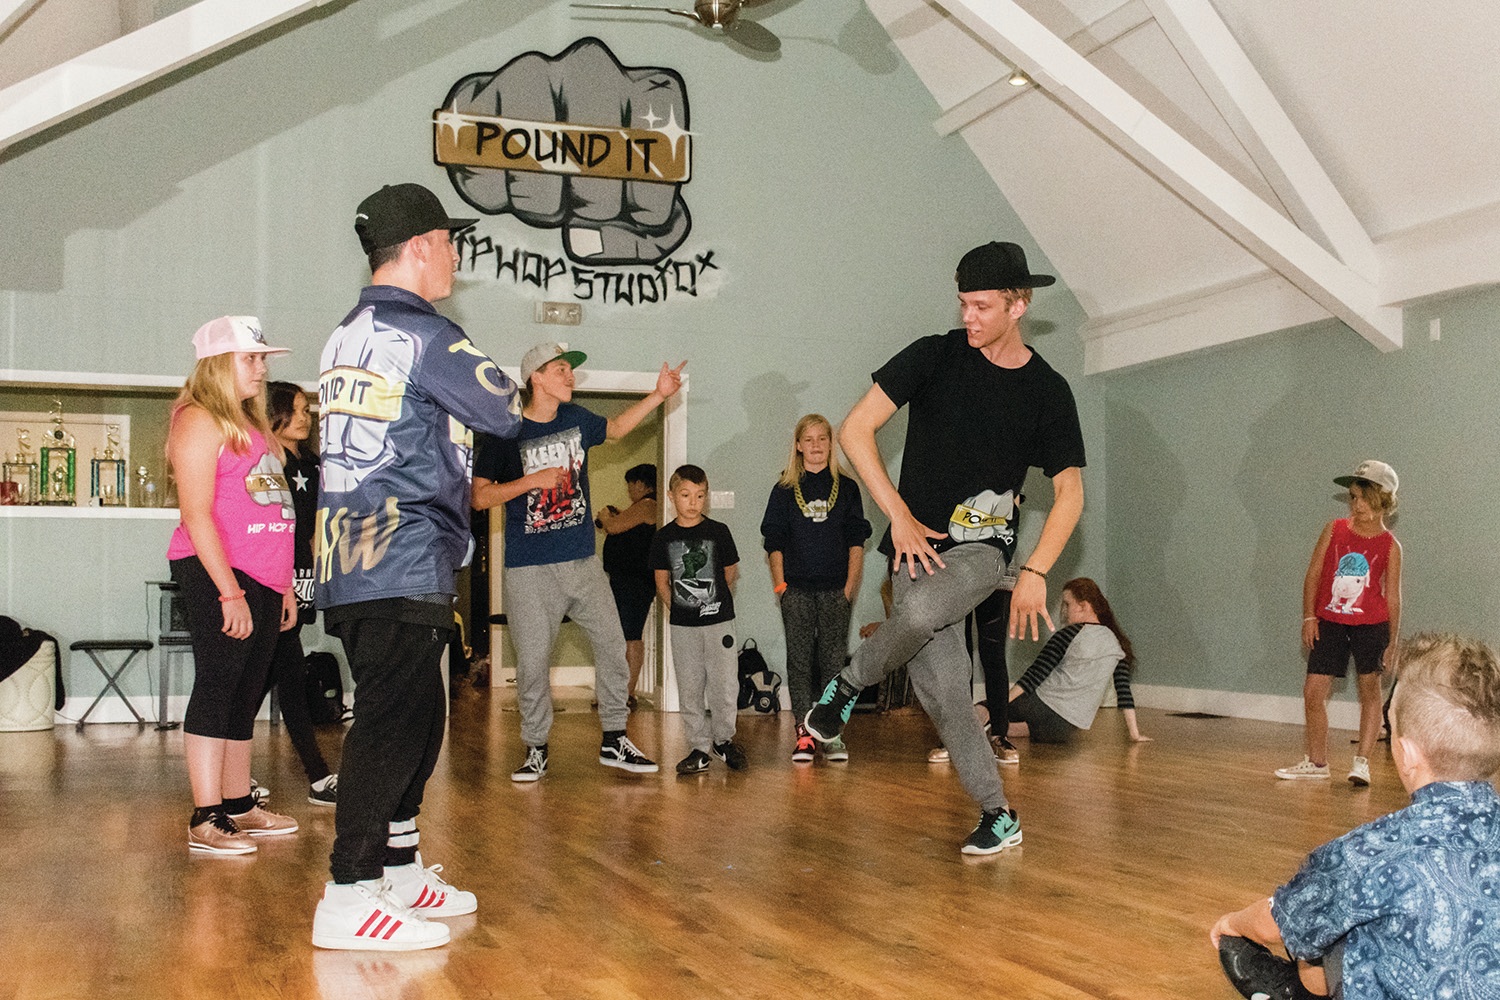 BUST A MOVE - Dancers practice their moves at the Pound It Hip Hop Studio. They recently jetted off to New York for a once in a lifetime experience.